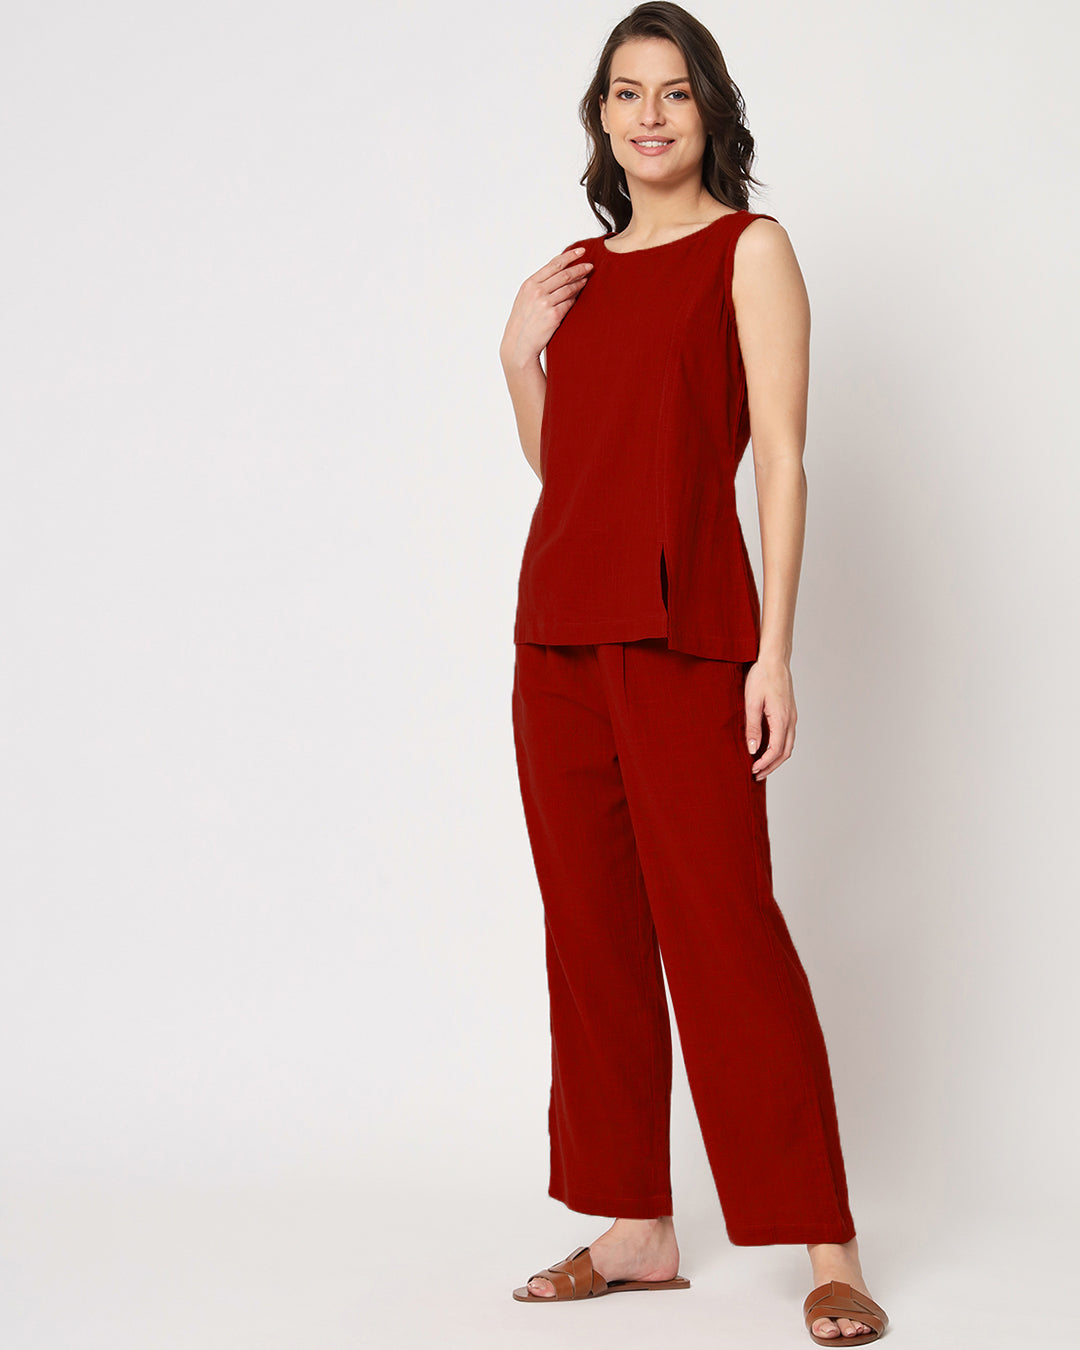 Classic Red Sleeveless Short Length Solid Top (Without Bottoms)